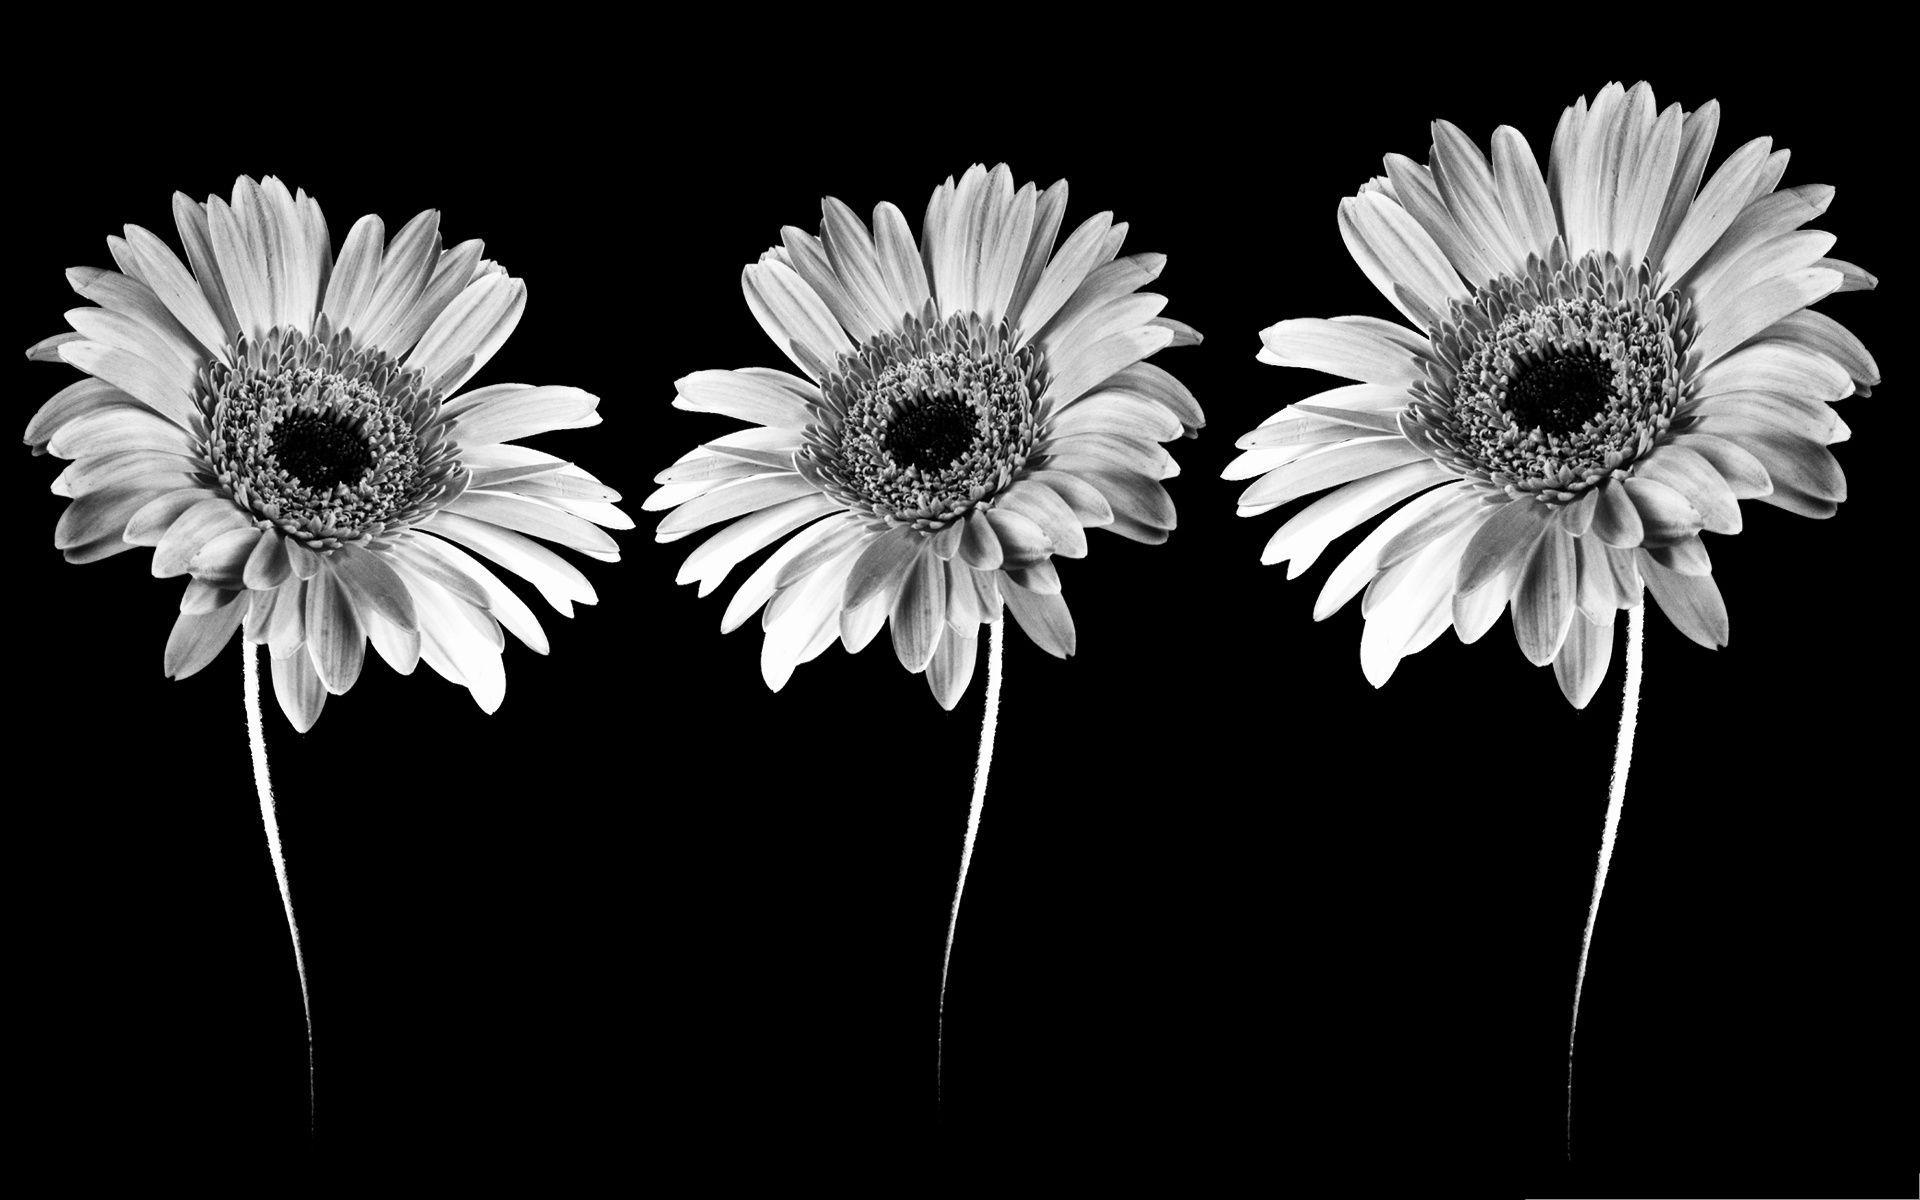 Cúc hoạ mi. Black and white flowers, Flowers black background, White flowers